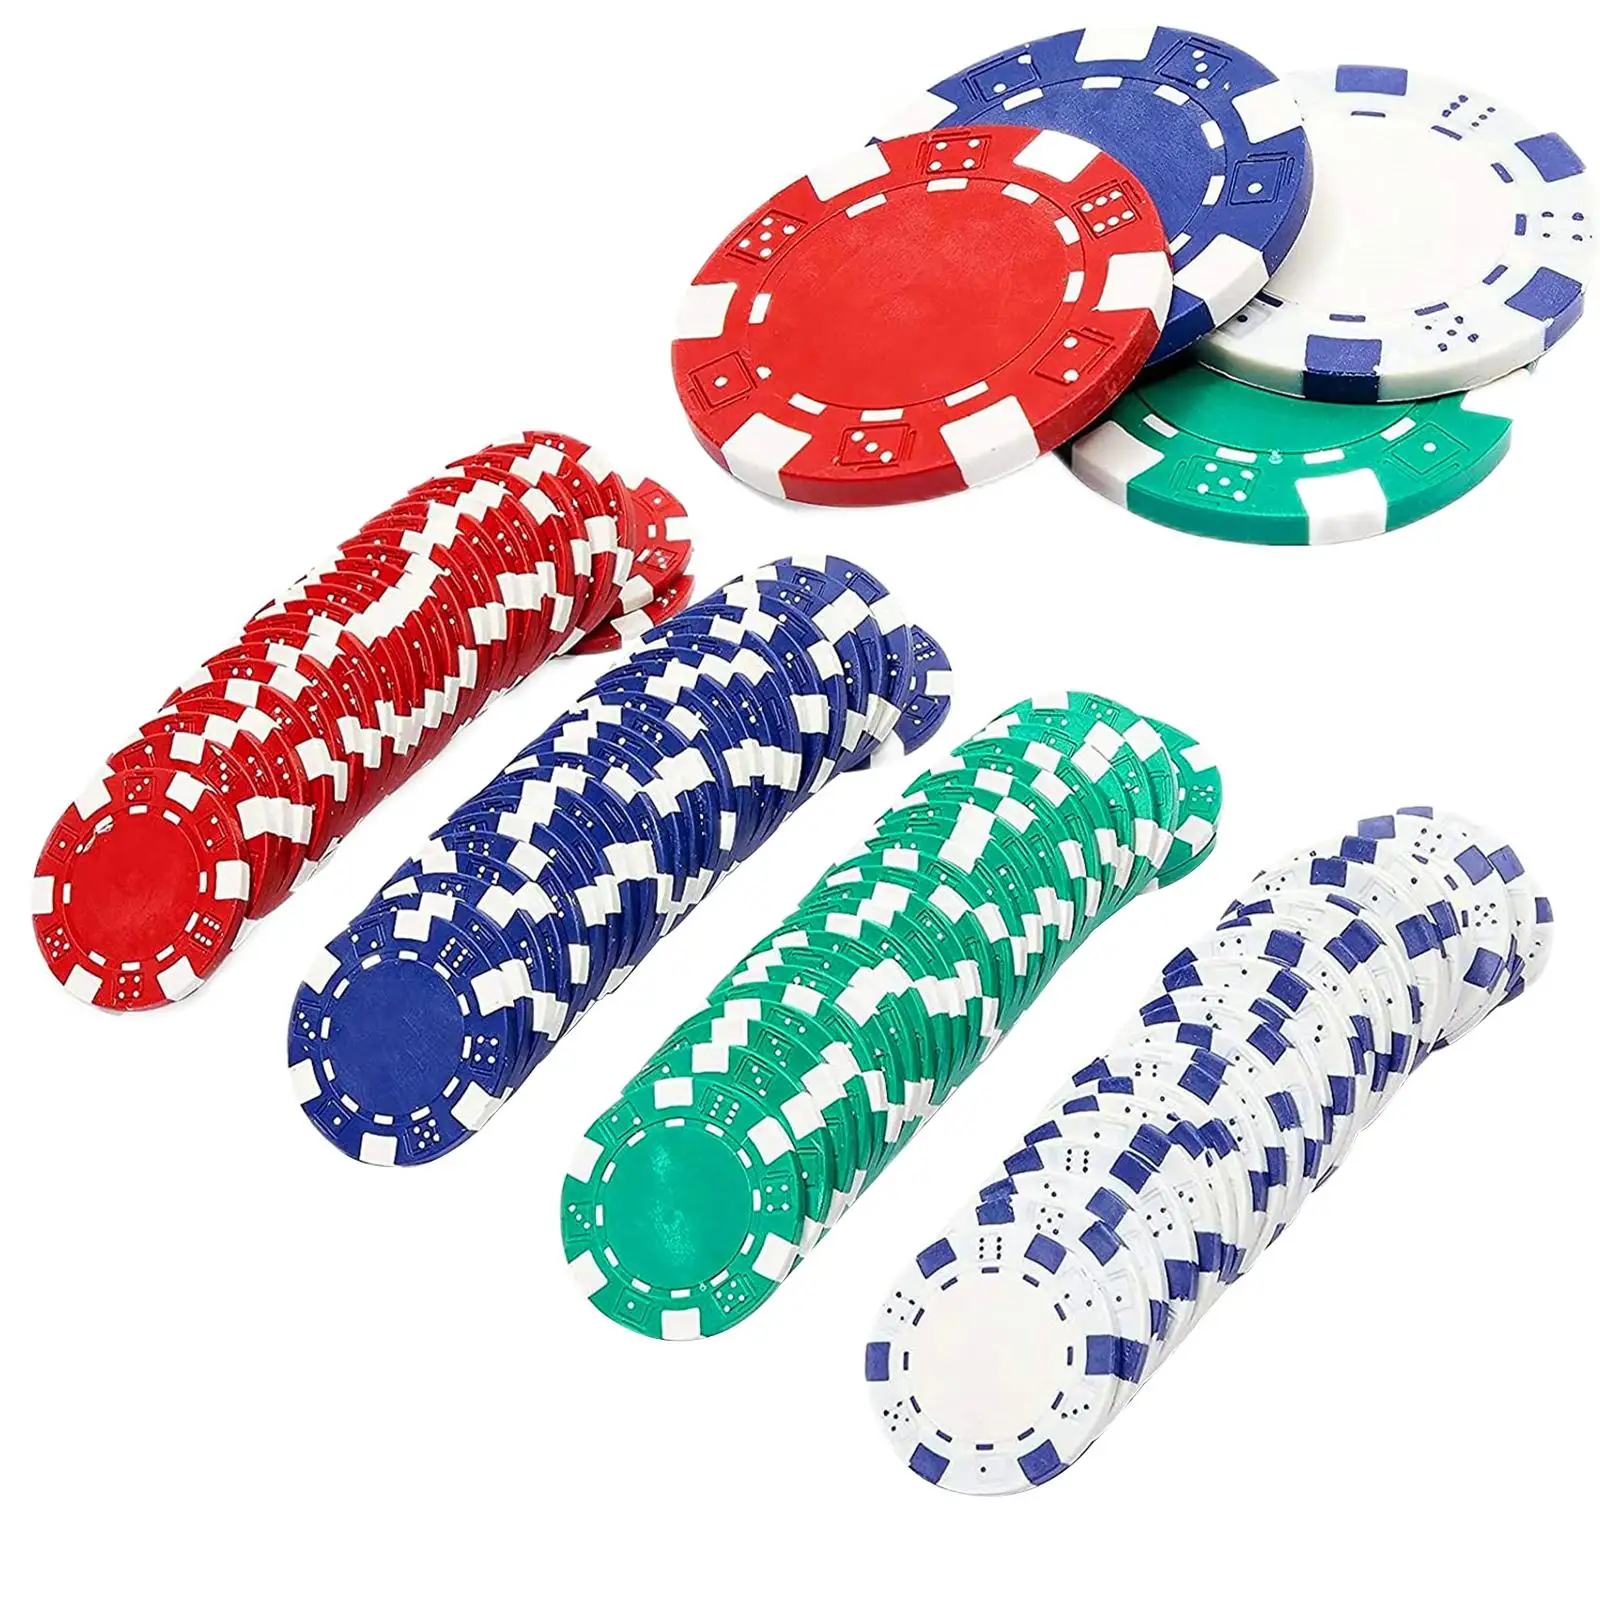 100 Pieces 4cm Poker Chips Bingo Chips Counting Chips for Poker Bingo Accs